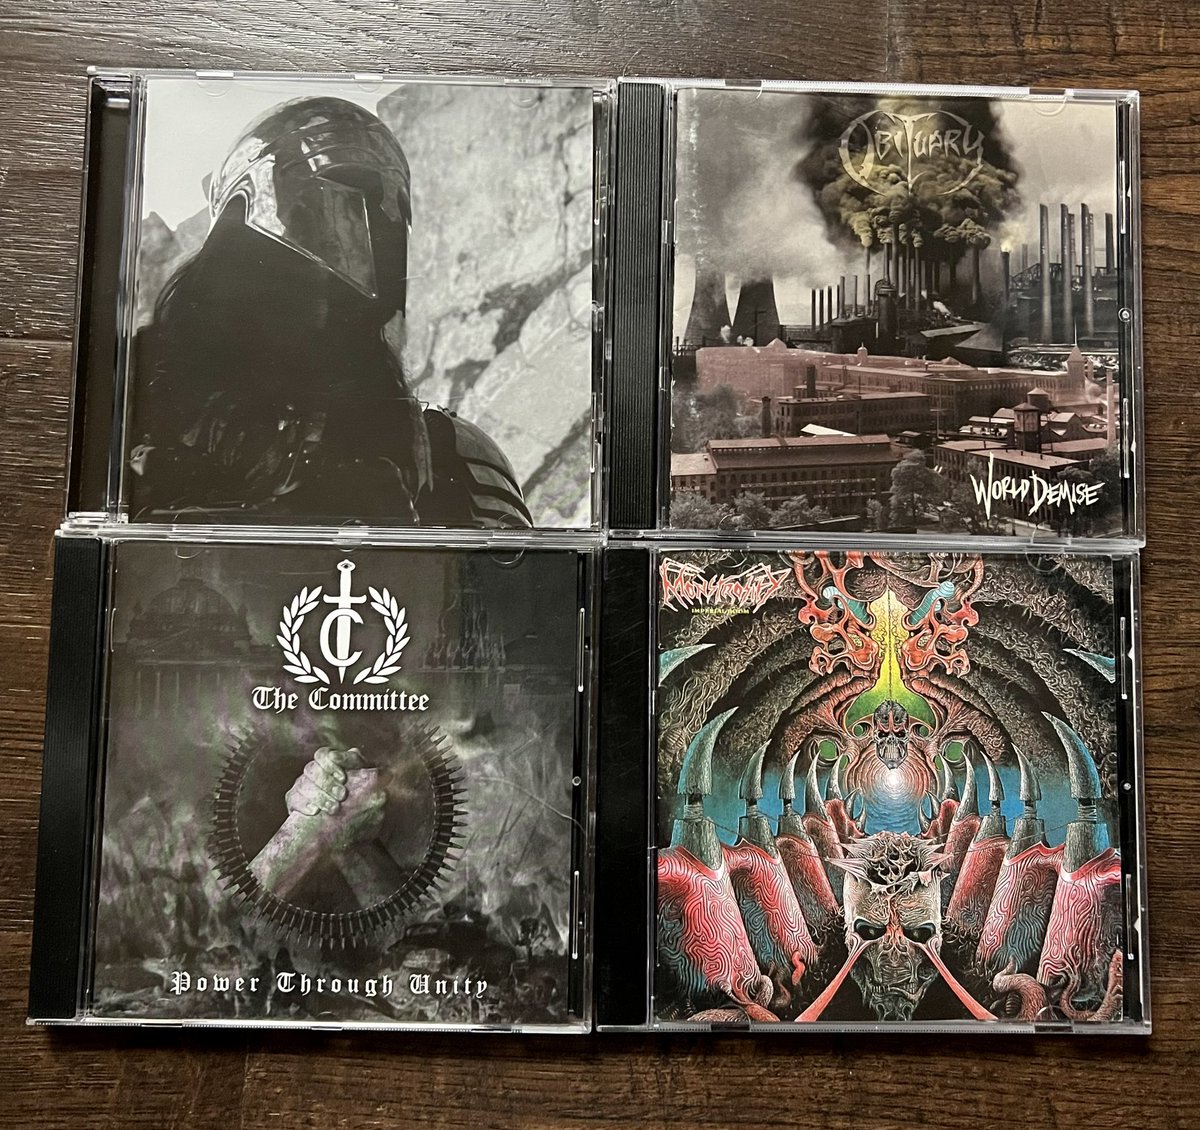 Been digging through my bins agian lately…
#SINdayPlaylist 
#Nocternity #Obituary 
#TheCommittee 
#Monstrosity
#DeathMetal #BlackMetal